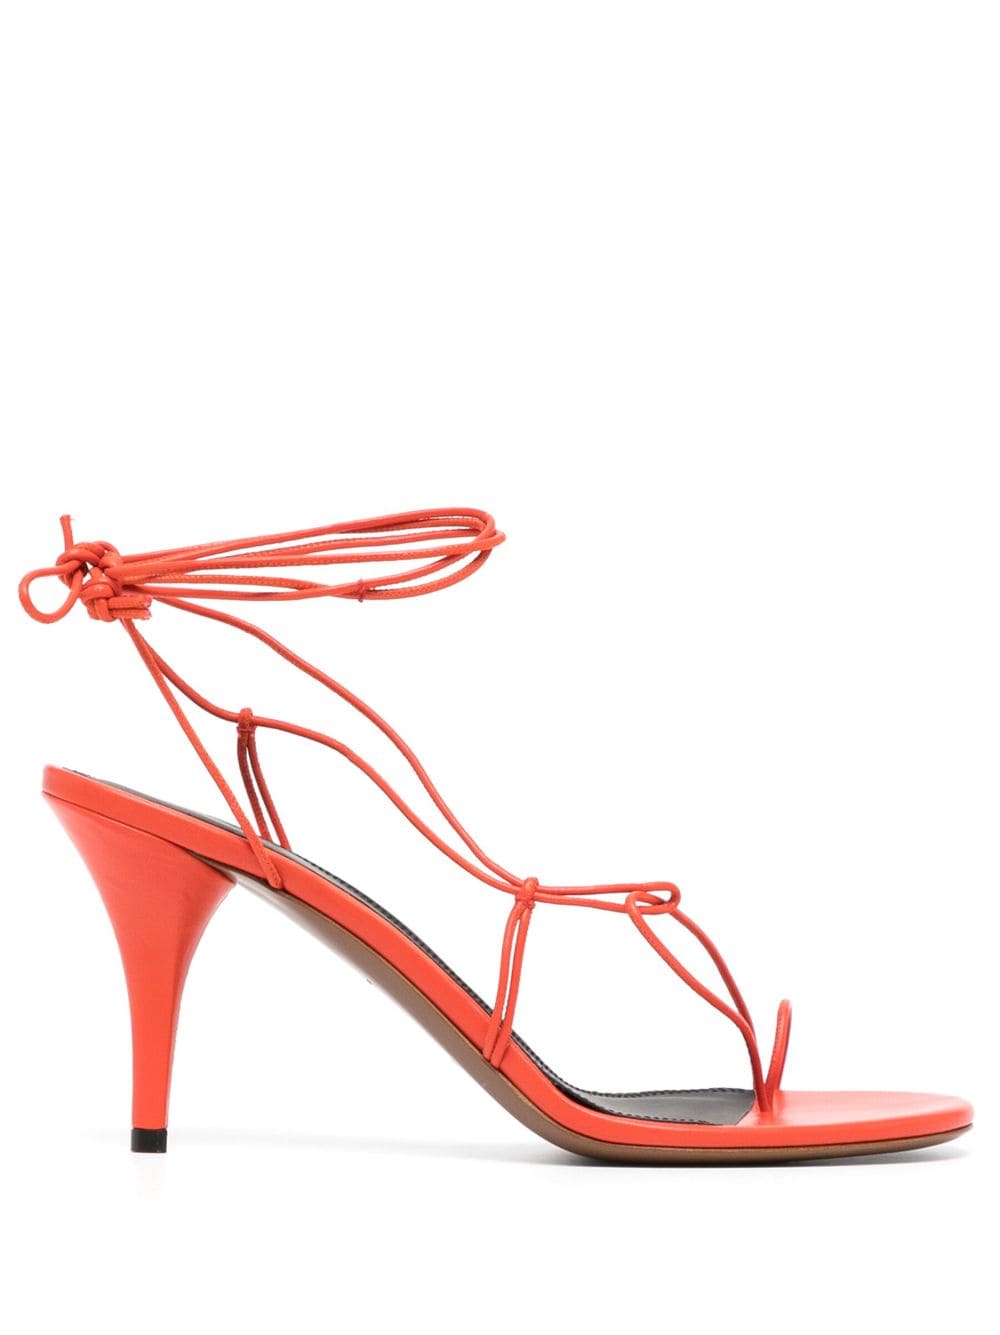 Neous Giena 80mm Strappy Sandals In Orange